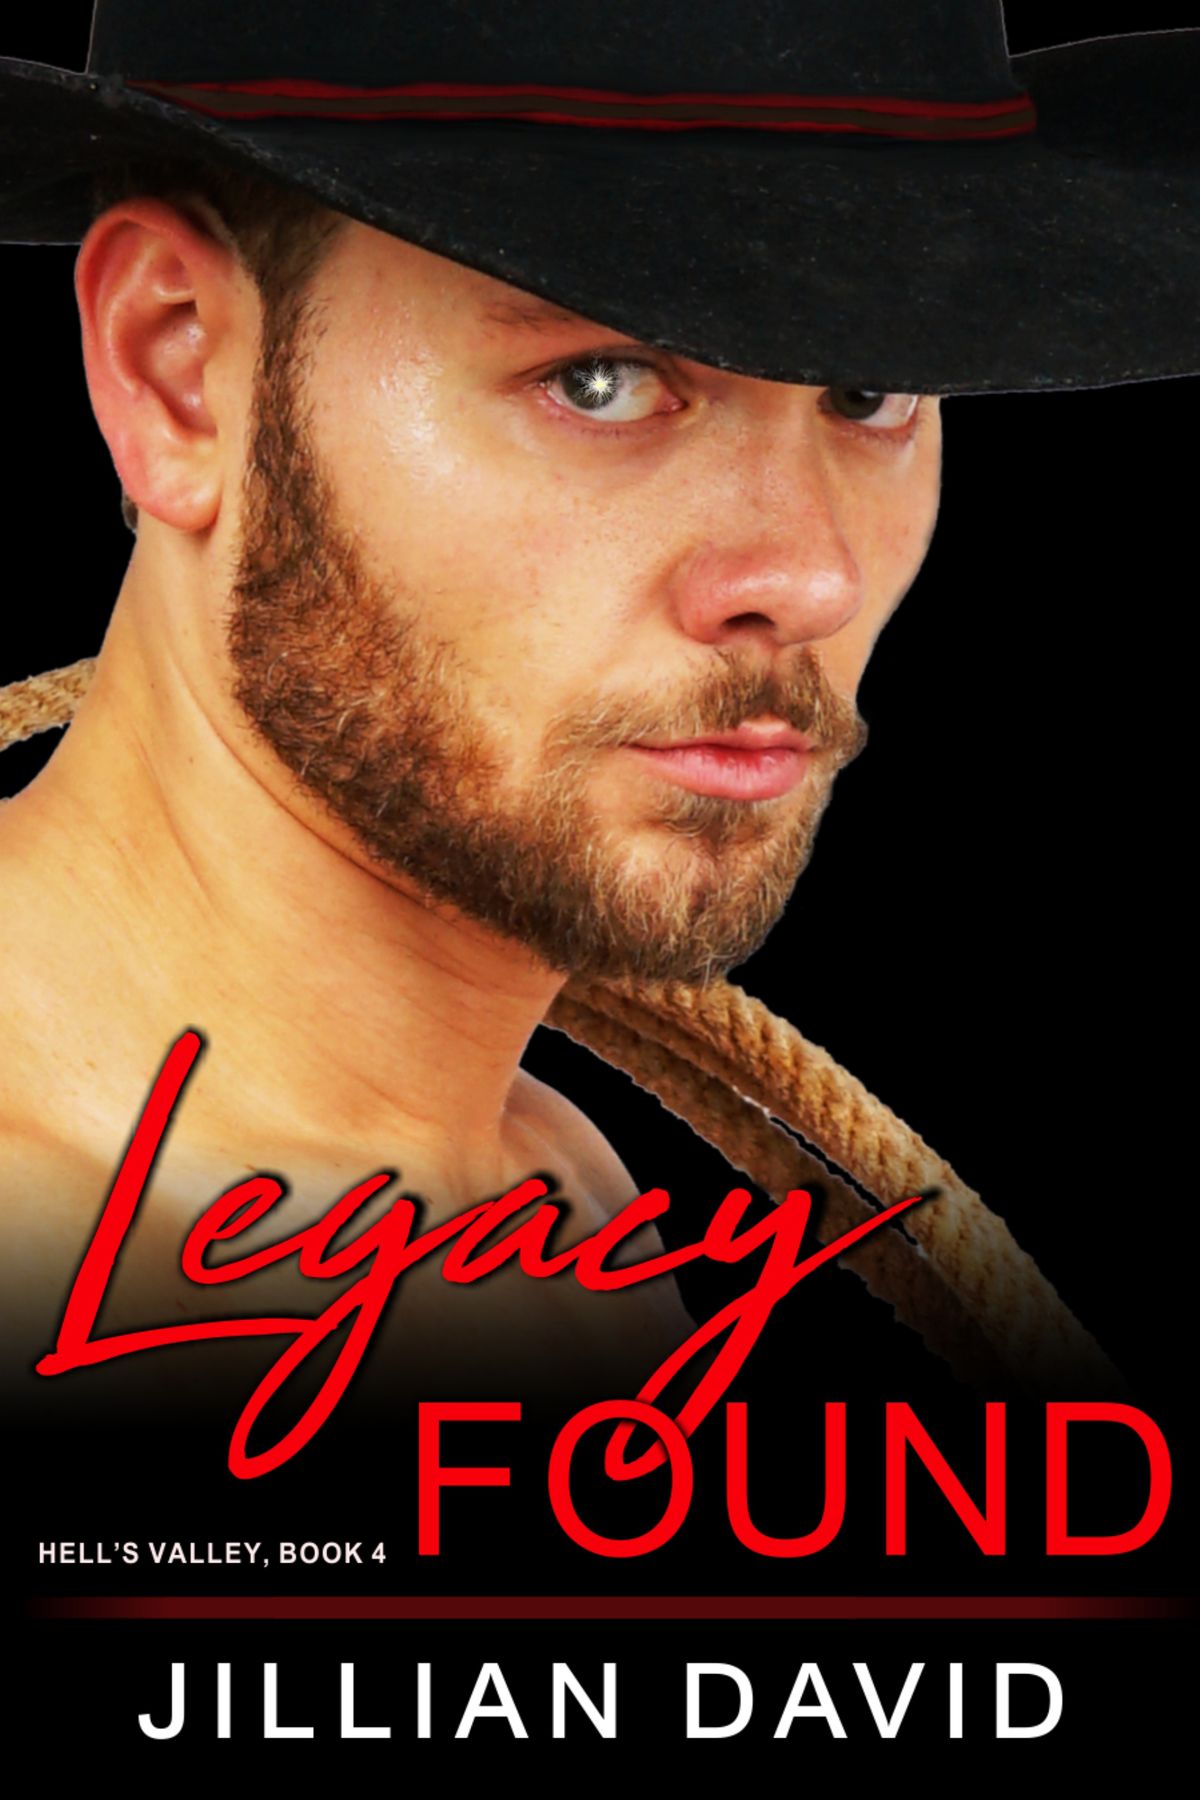 Book Review: “Legacy Found” (Hell’s Valley #4) by Jillian David